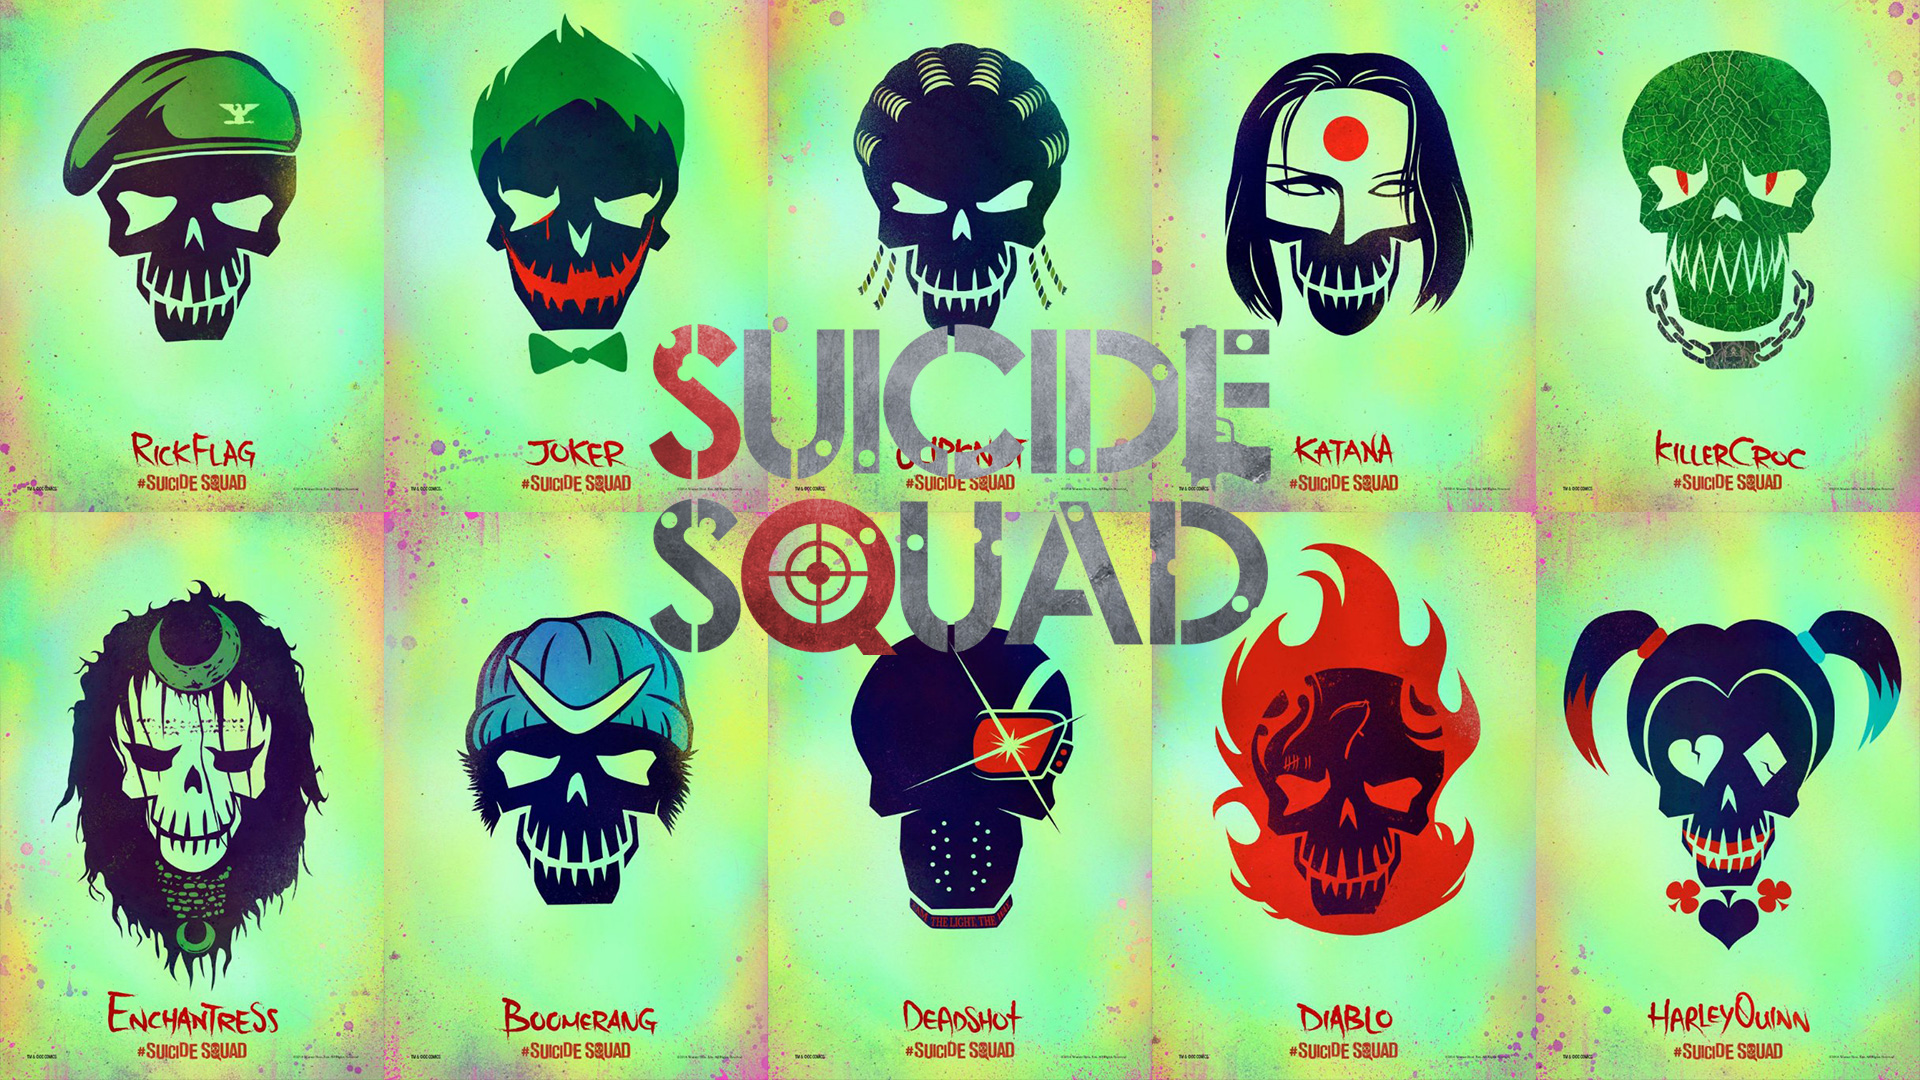 Suicide Squad movie wallpaper hd HD Wallpapers Images Stock 1920x1080